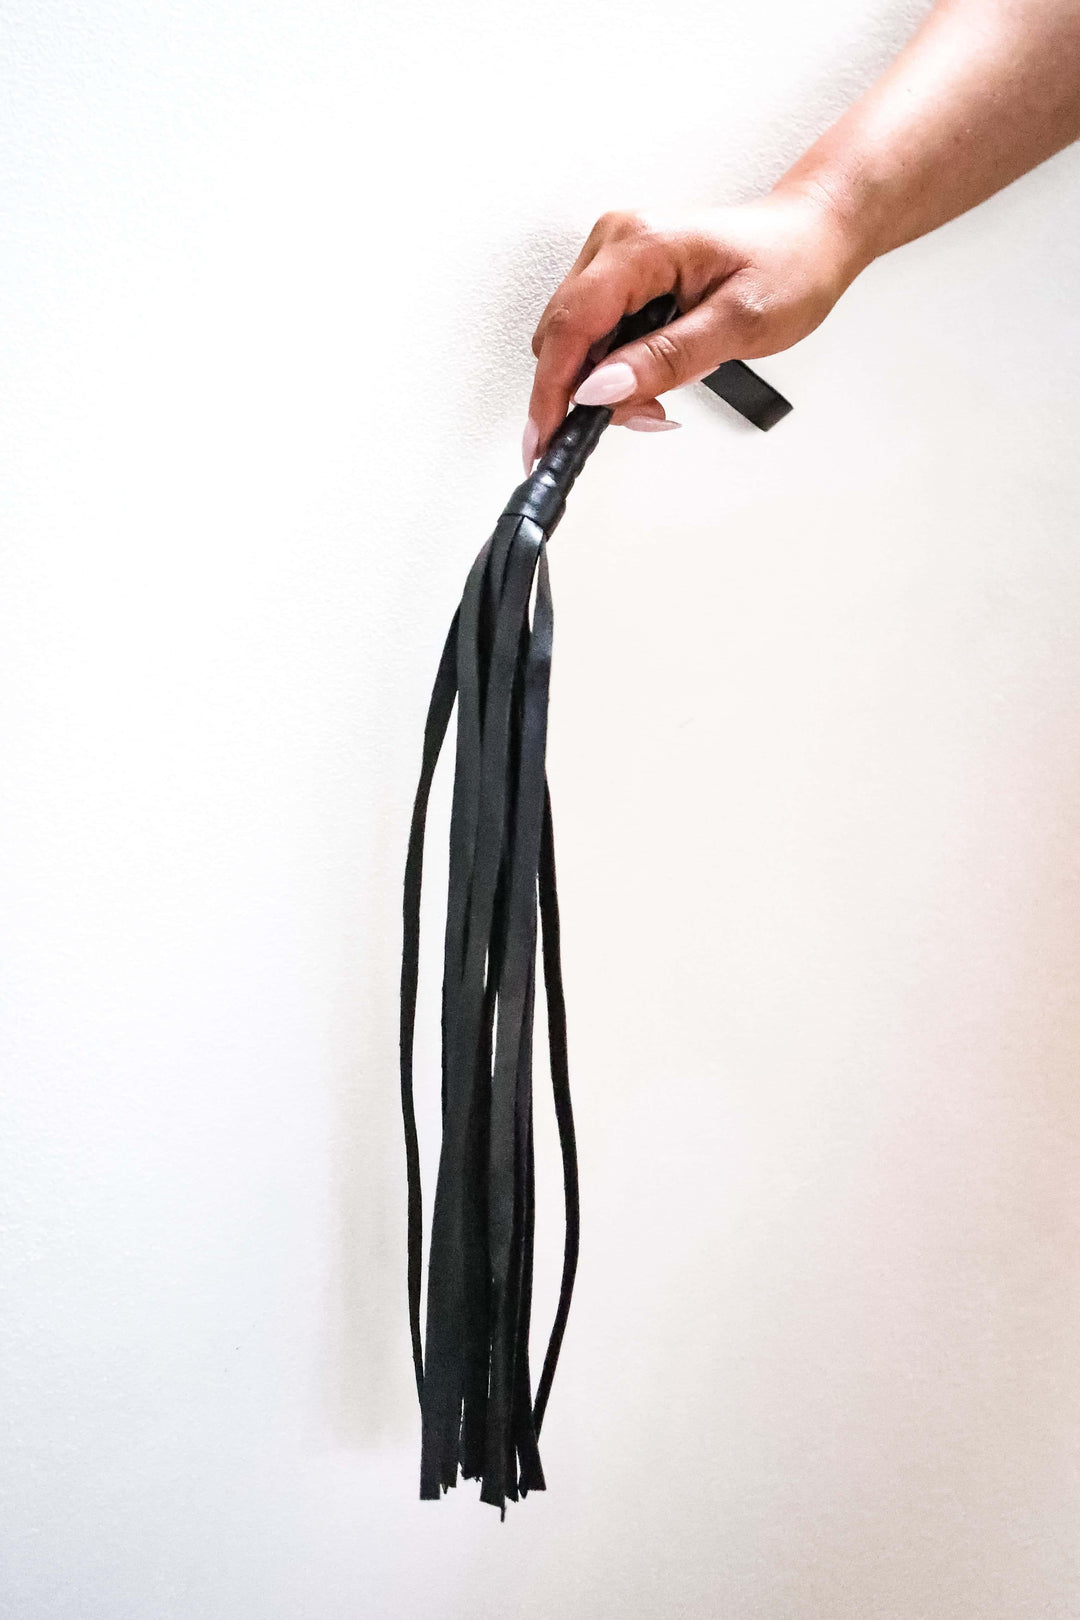 Wild Vegan Leather Whip - $24.00 - Whip - Naked Curve